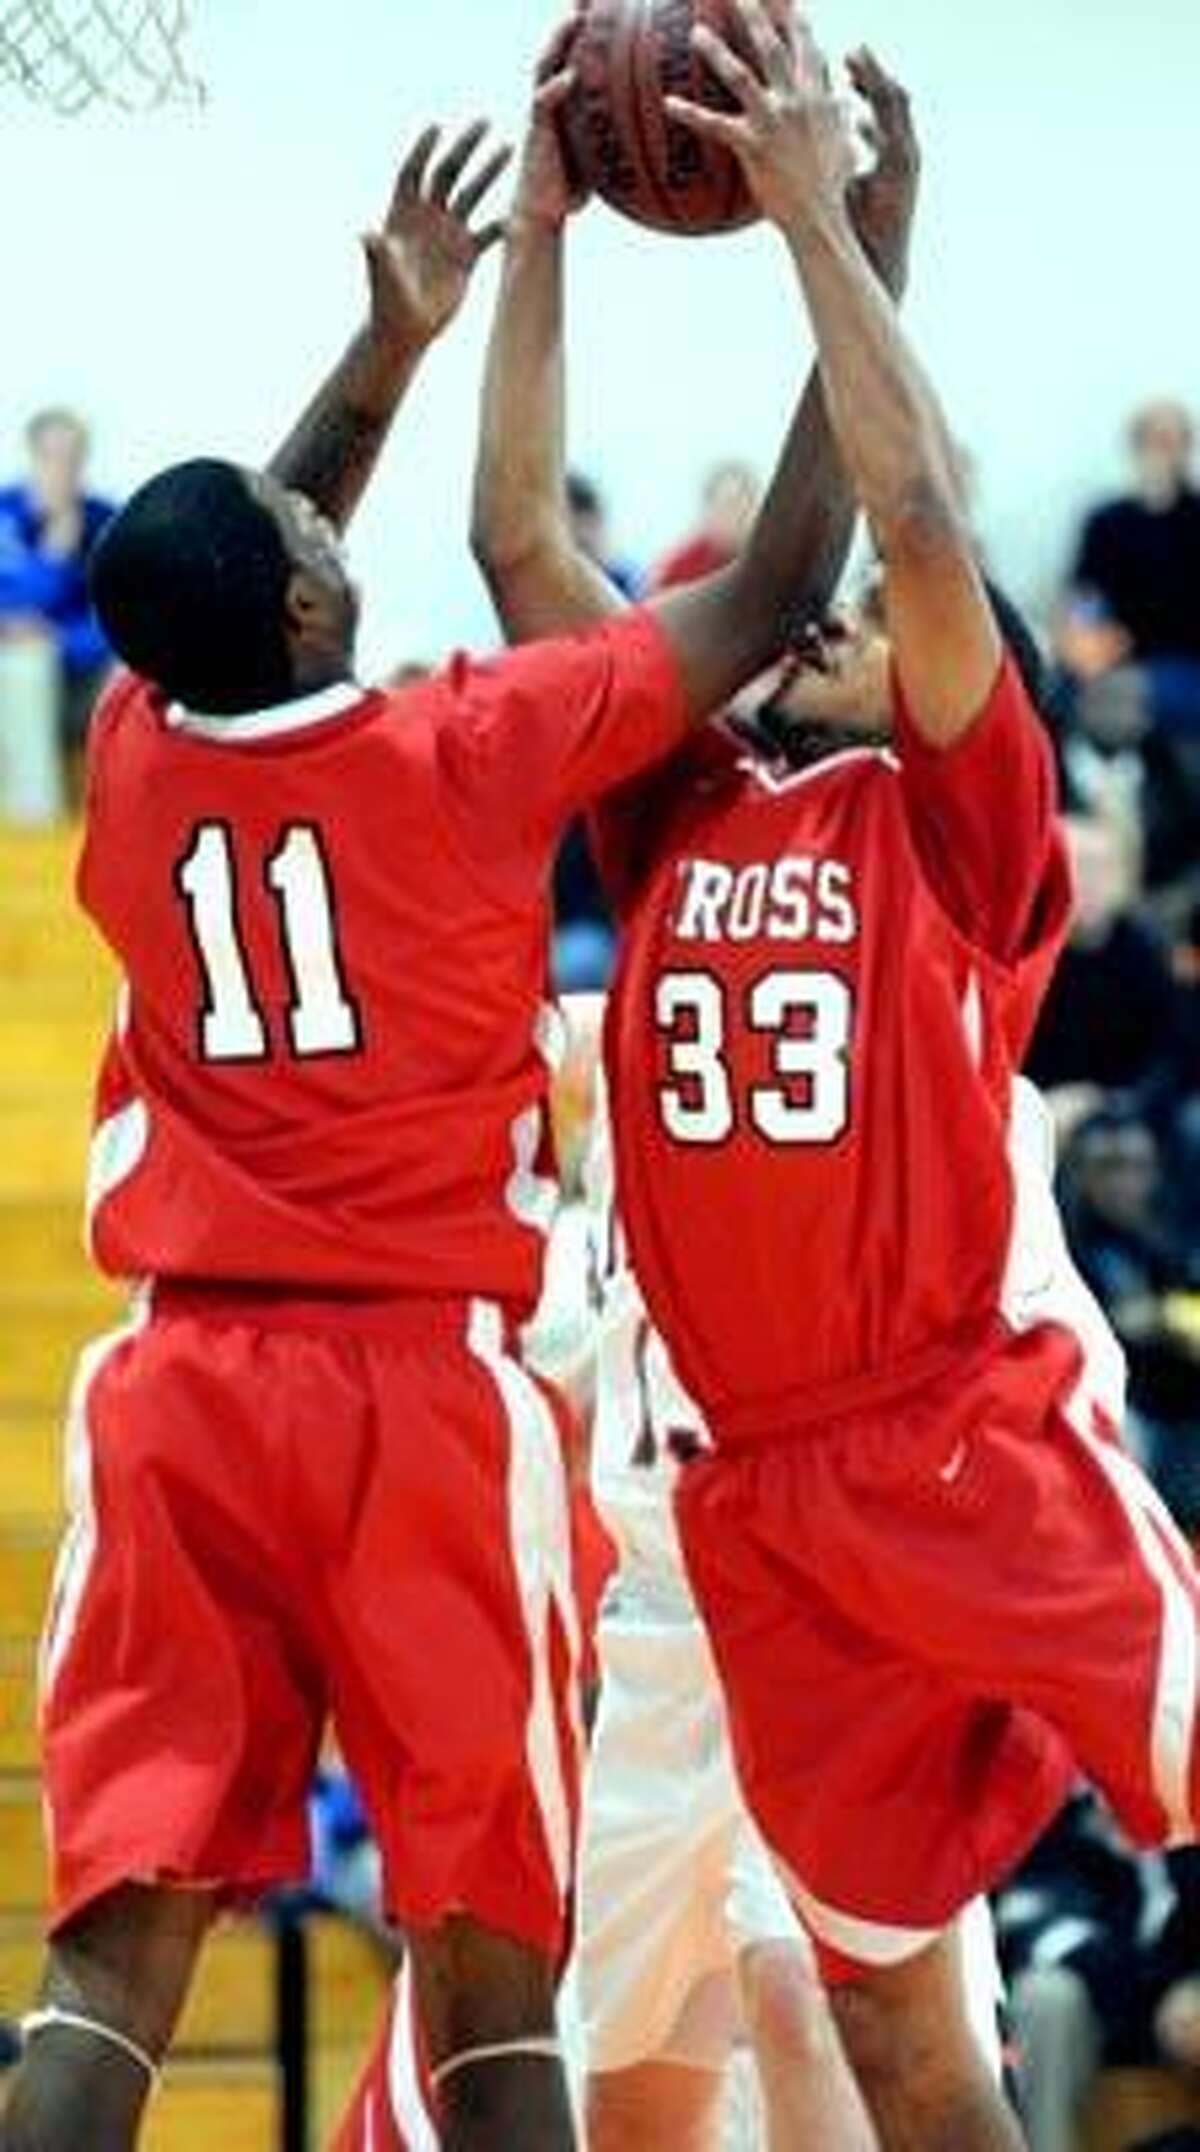 Dontay Long (left) and Kyle Holmes (right) of Wilbur Cross grab a rebound against Lyman Hall in the first half on 12/15/2010.Photo by Arnold Gold/New Haven Register AG0396A